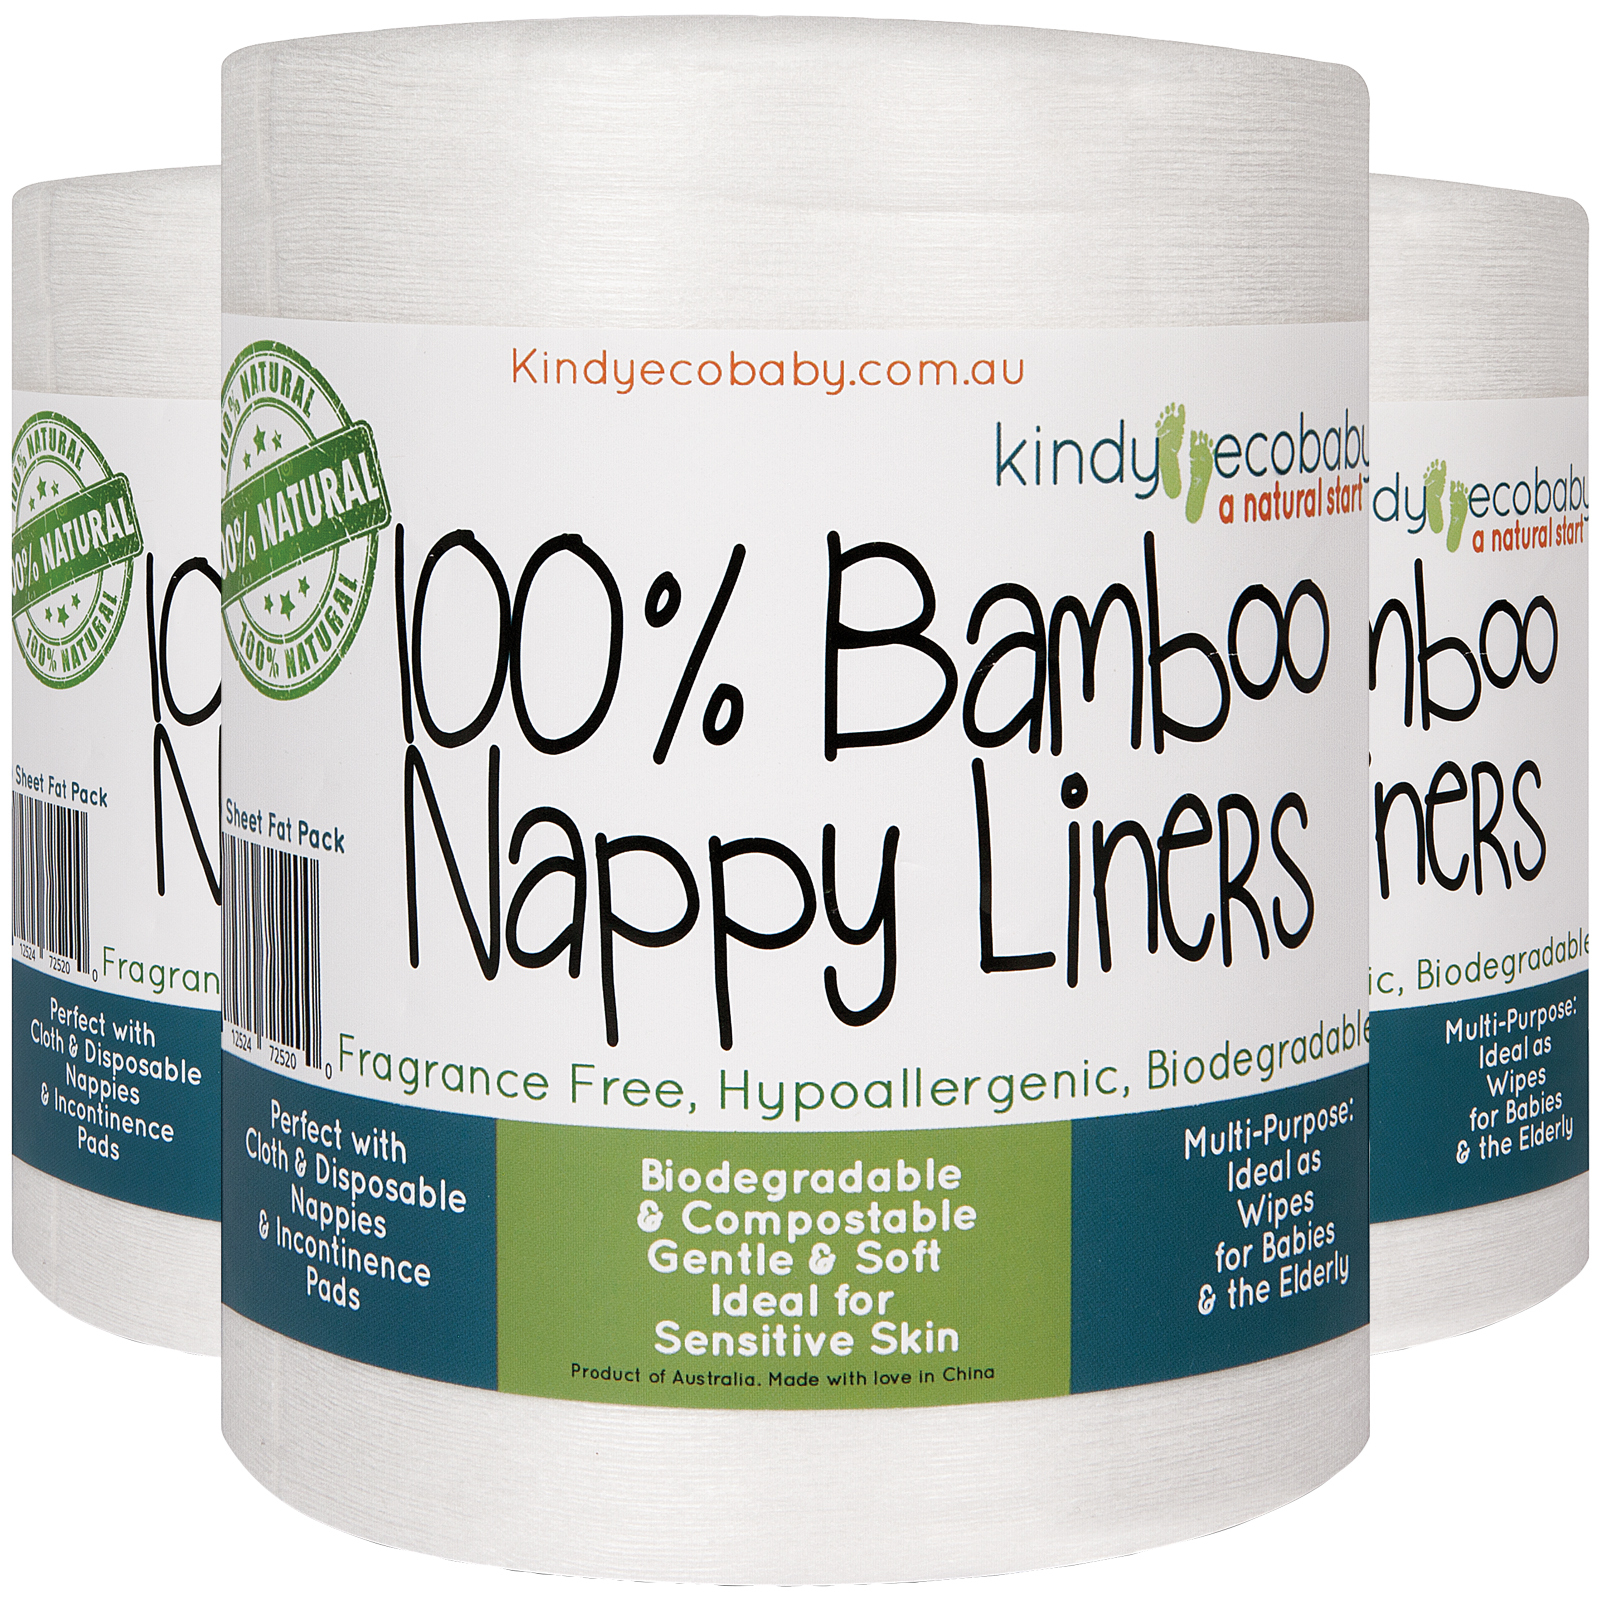 Three rolls of Kindy Ecobaby Bamboo Flushable and disposable nappy liners 